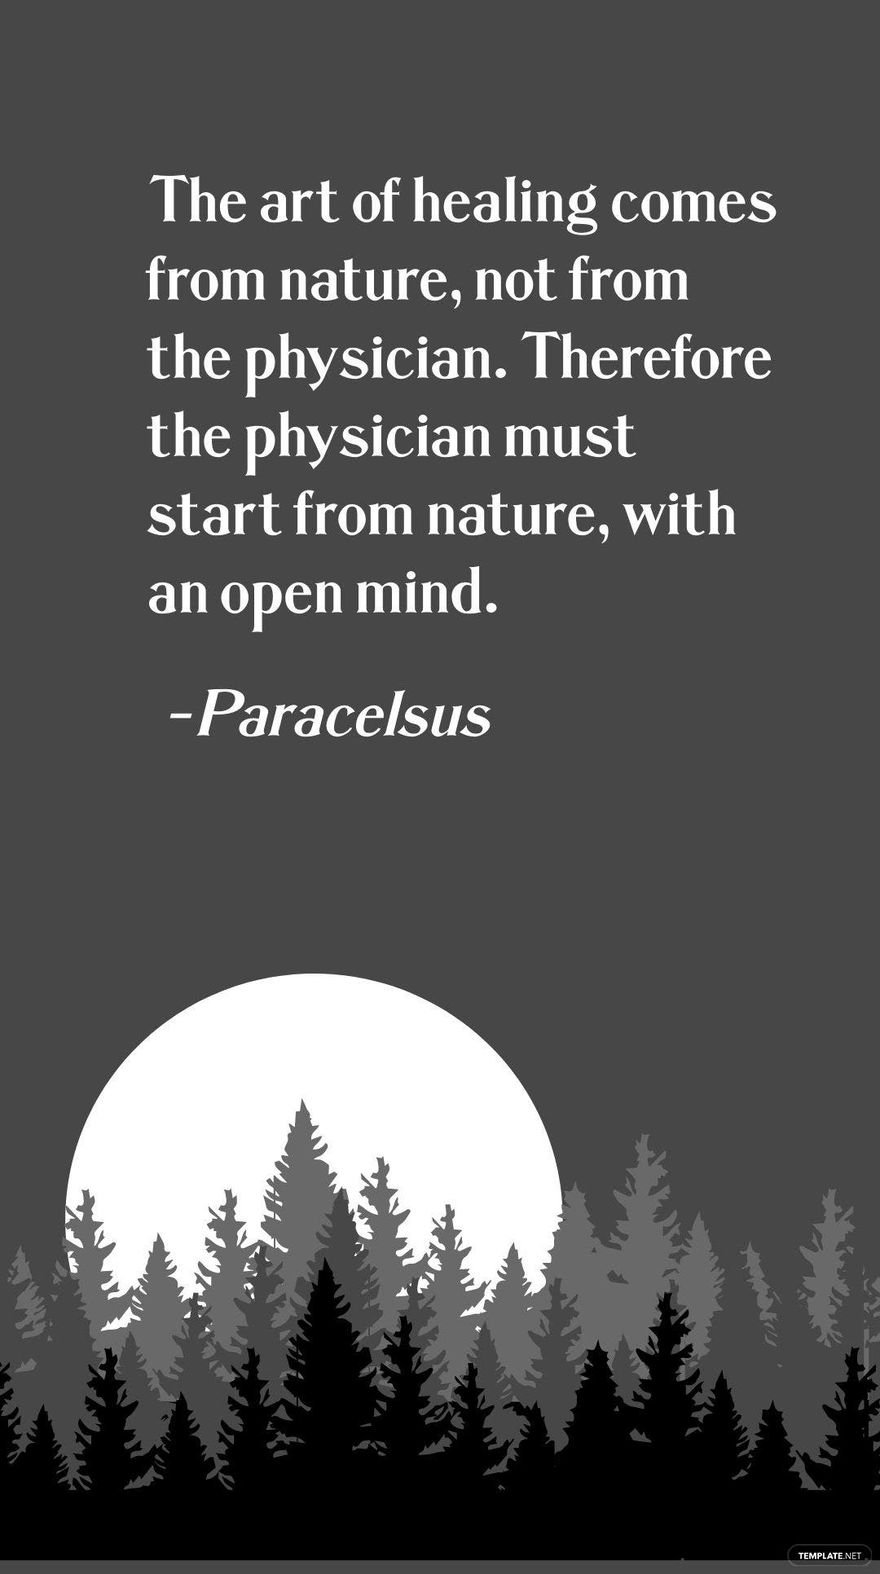 Paracelsus - The art of healing comes from nature, not from the physician. Therefore the physician must start from nature, with an open mind. in JPG